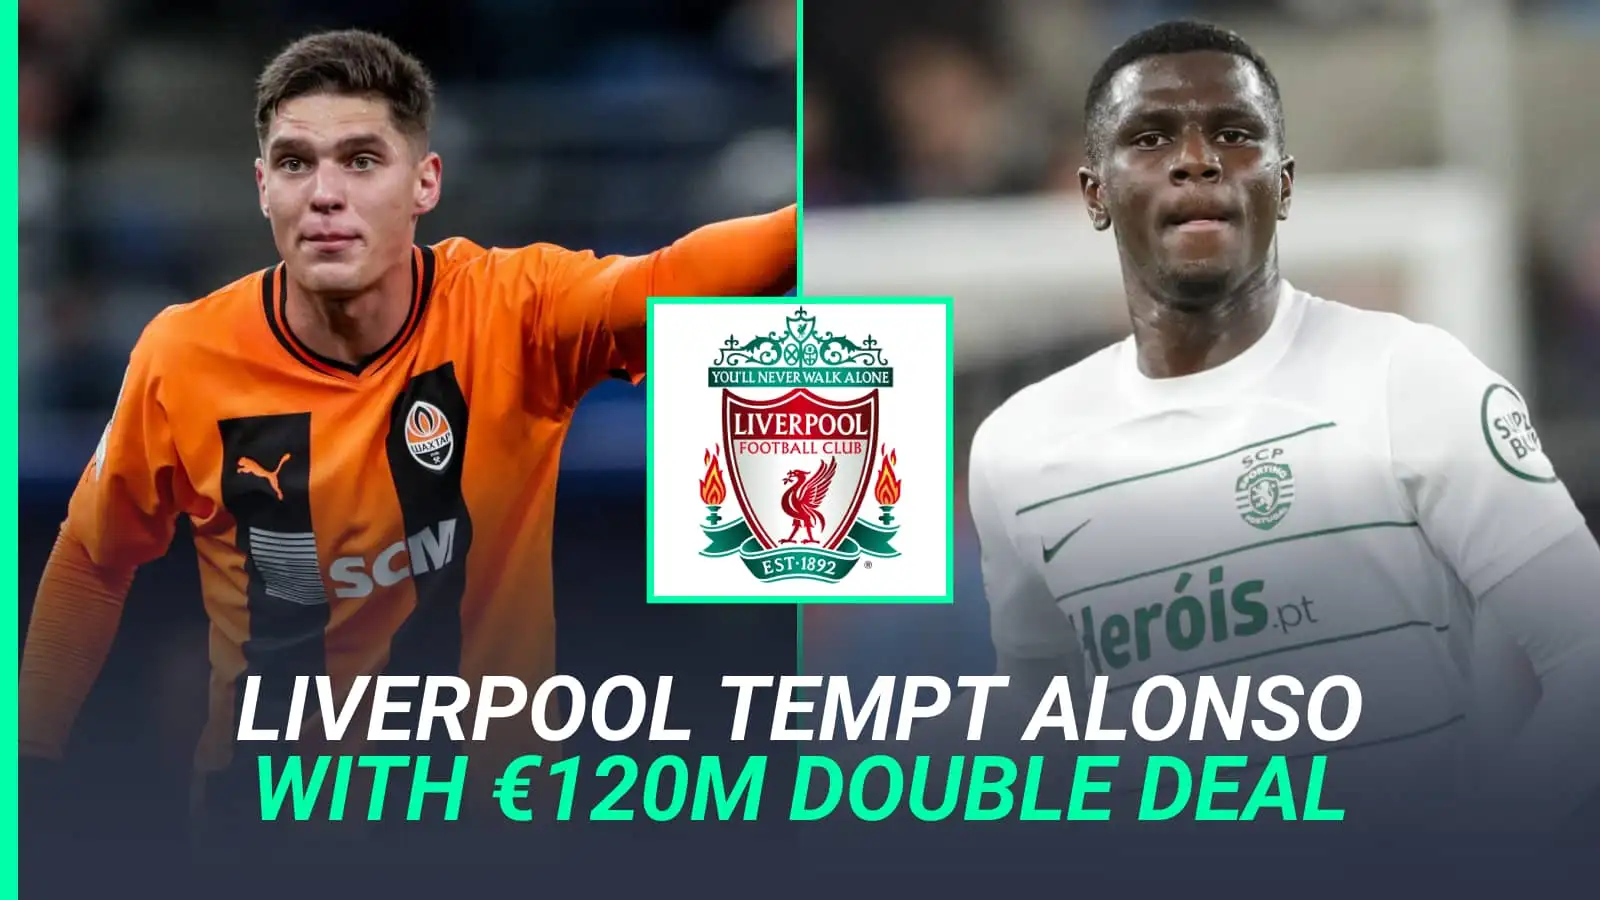 Euro Paper Talk: Liverpool tempt Alonso with huge €50m midfielder and €70m defender deals; Man Utd scouts wowed by €50m Atalanta star